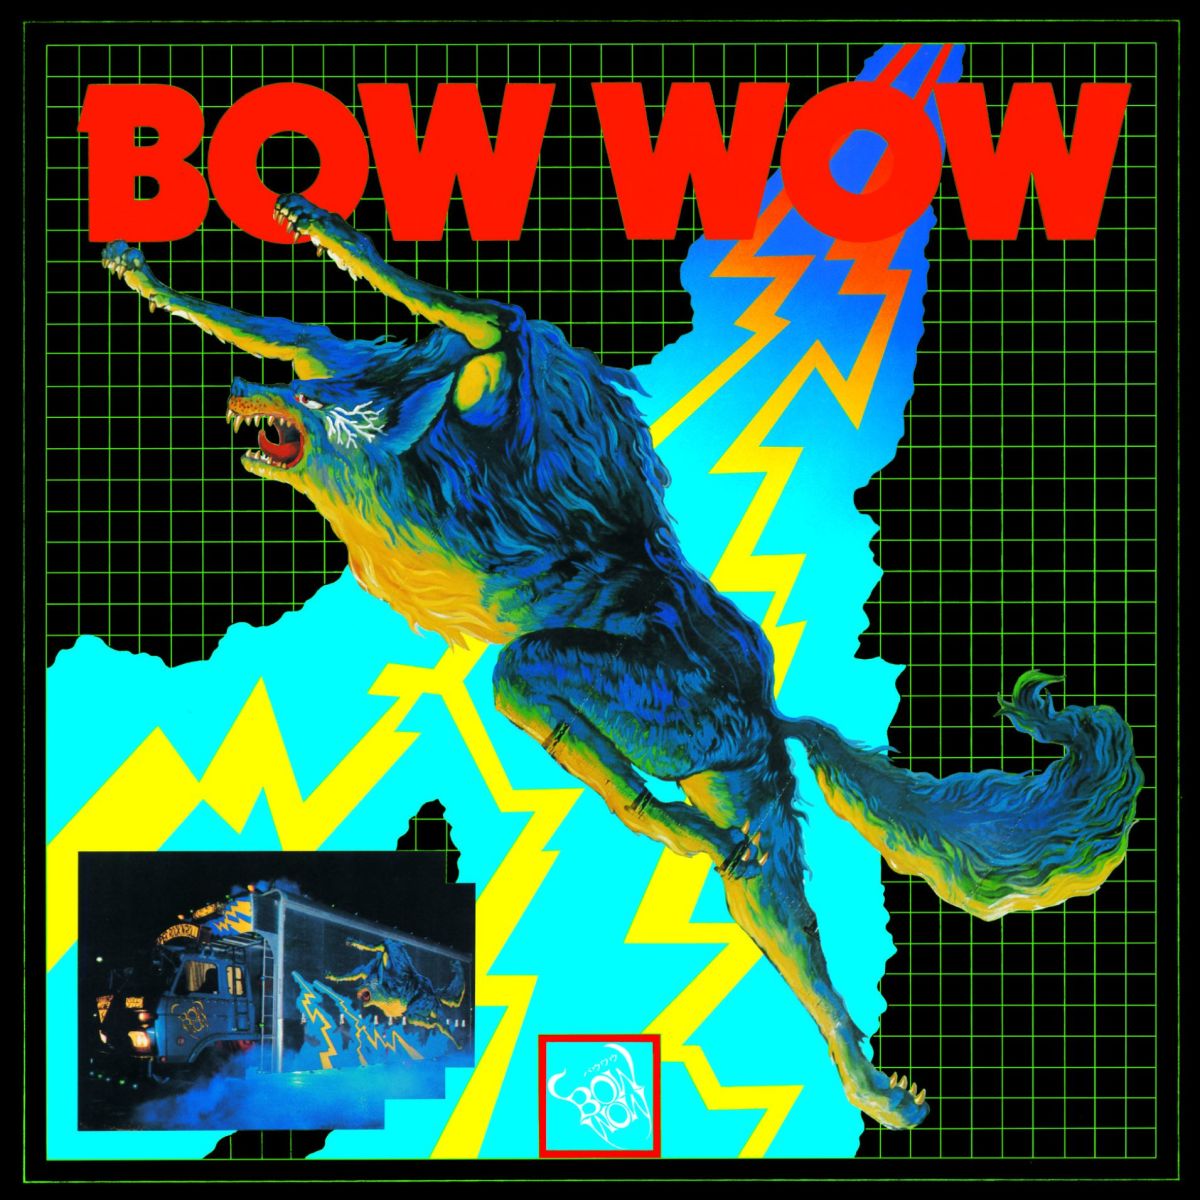 Bow Wow - Hoero! Bow Wow